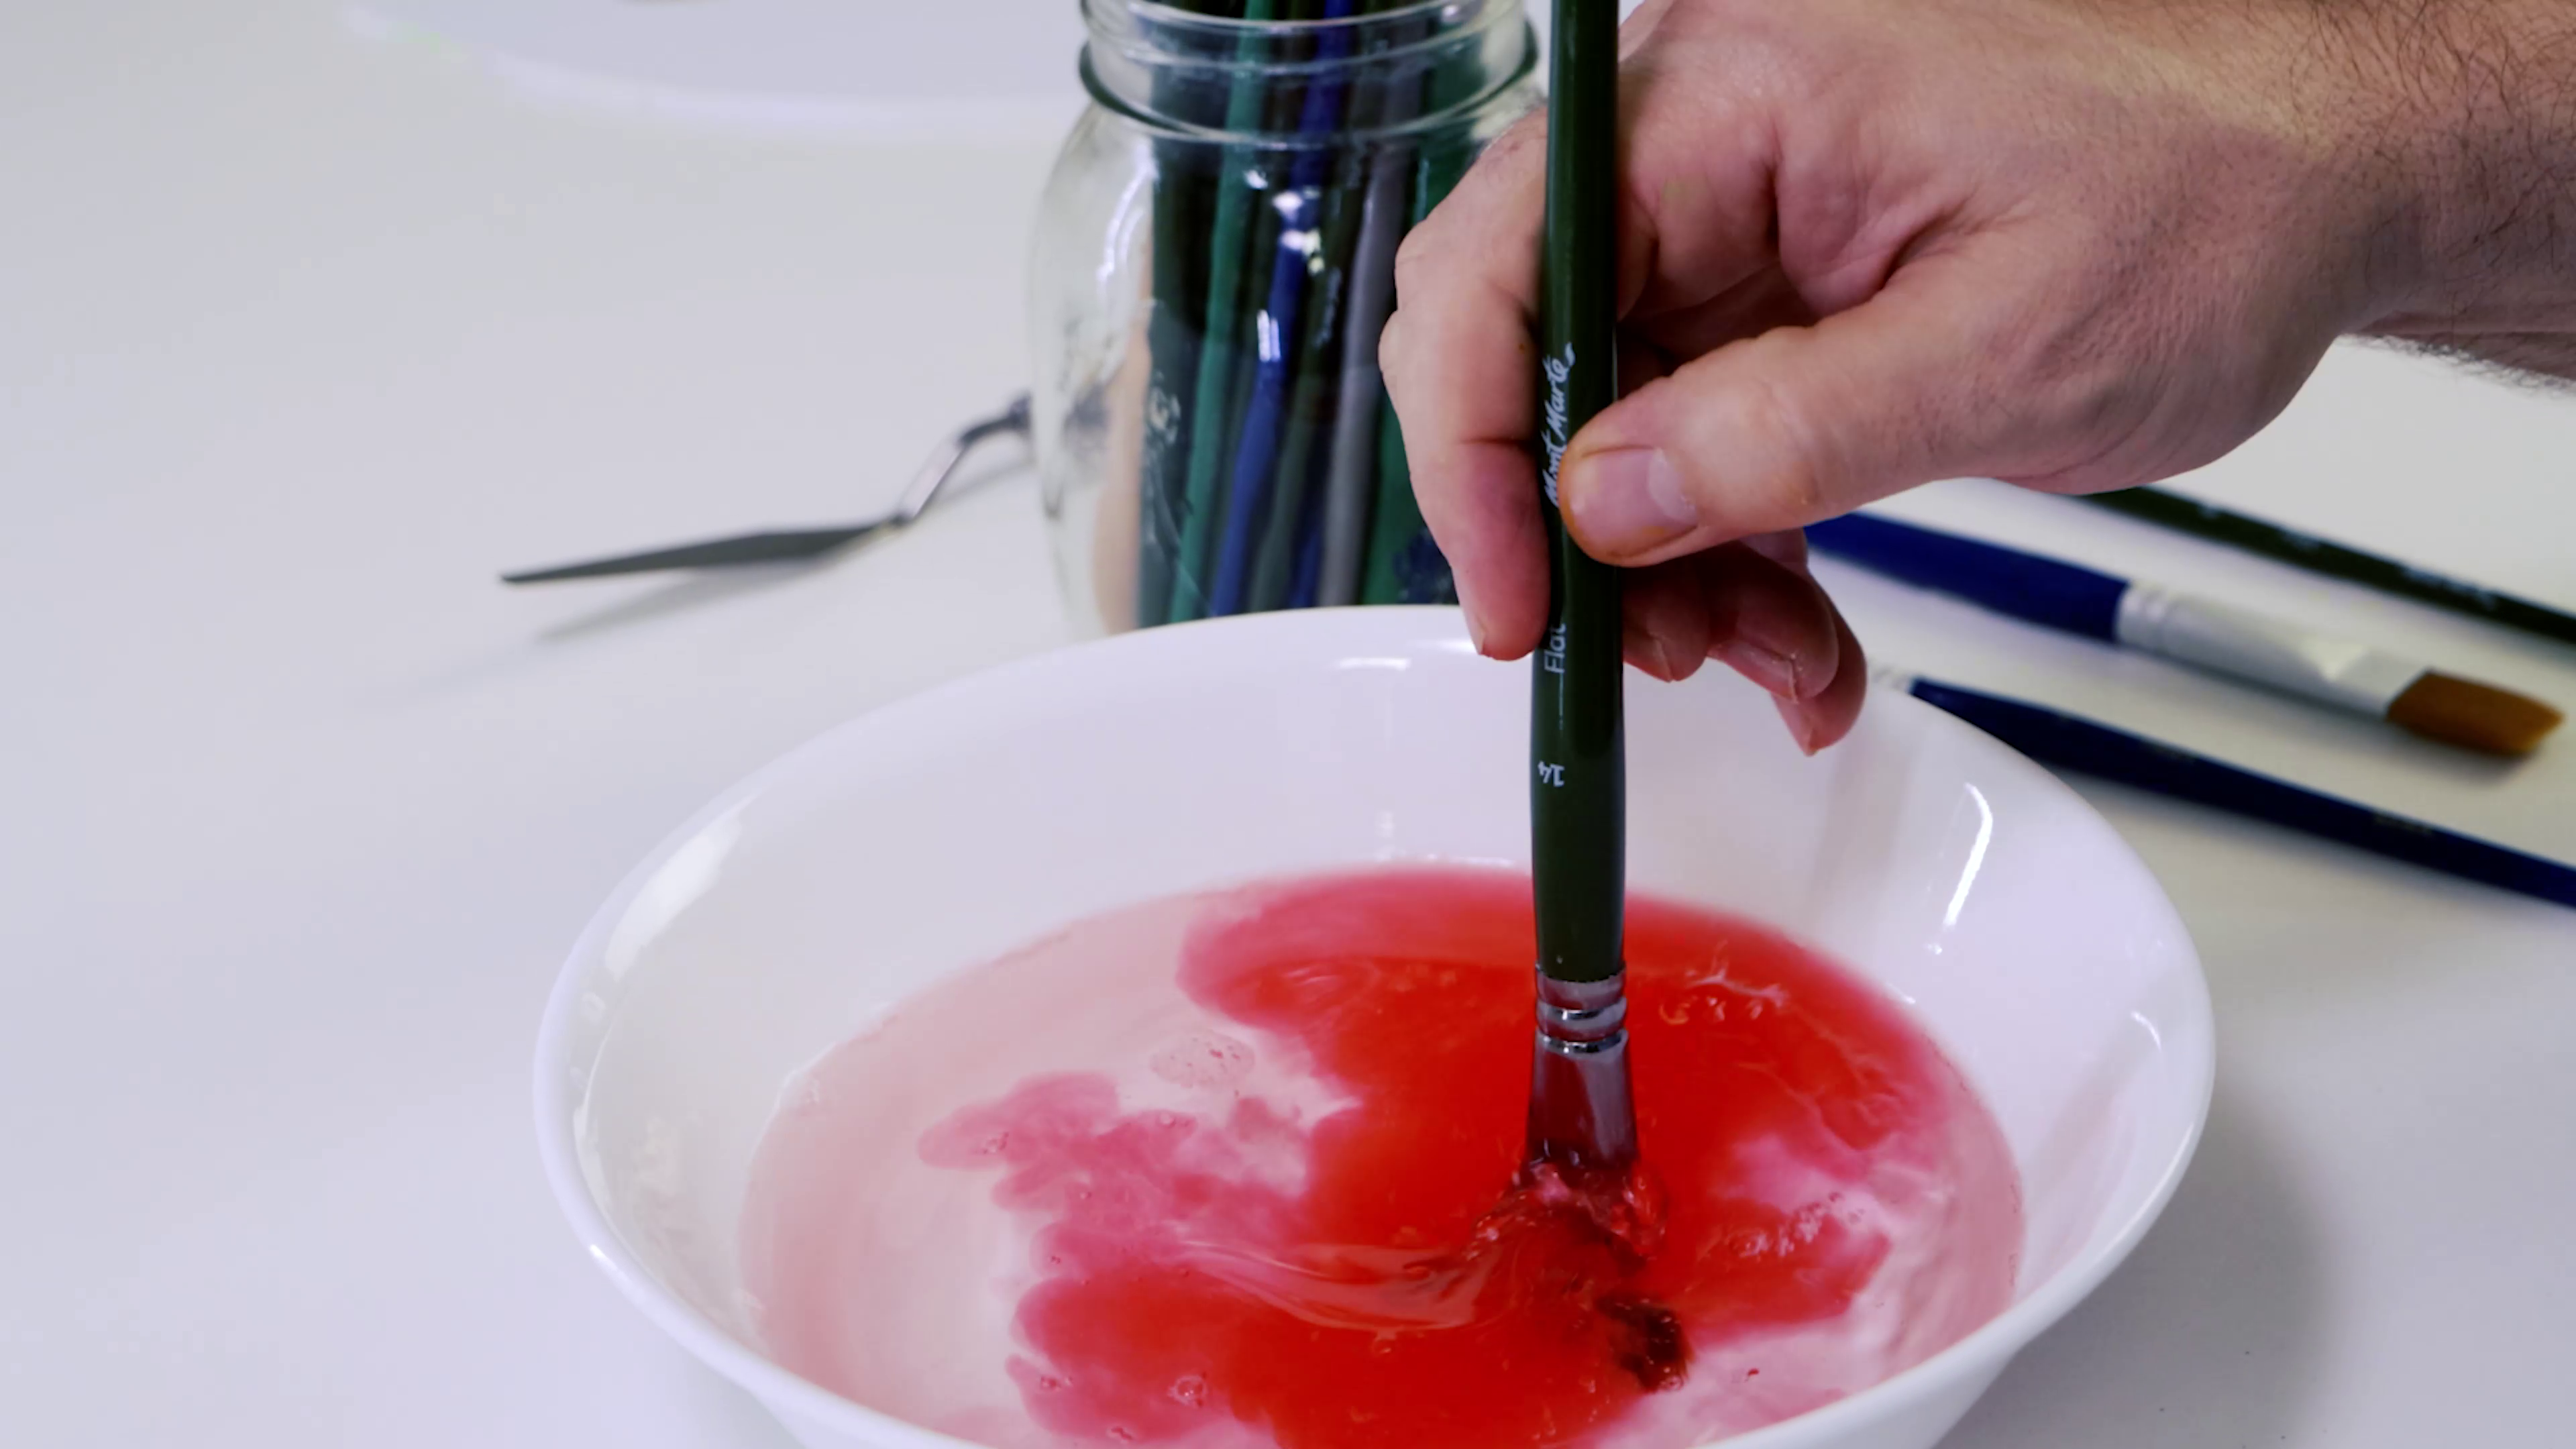 Red paint being washed off an acrylic paint brush